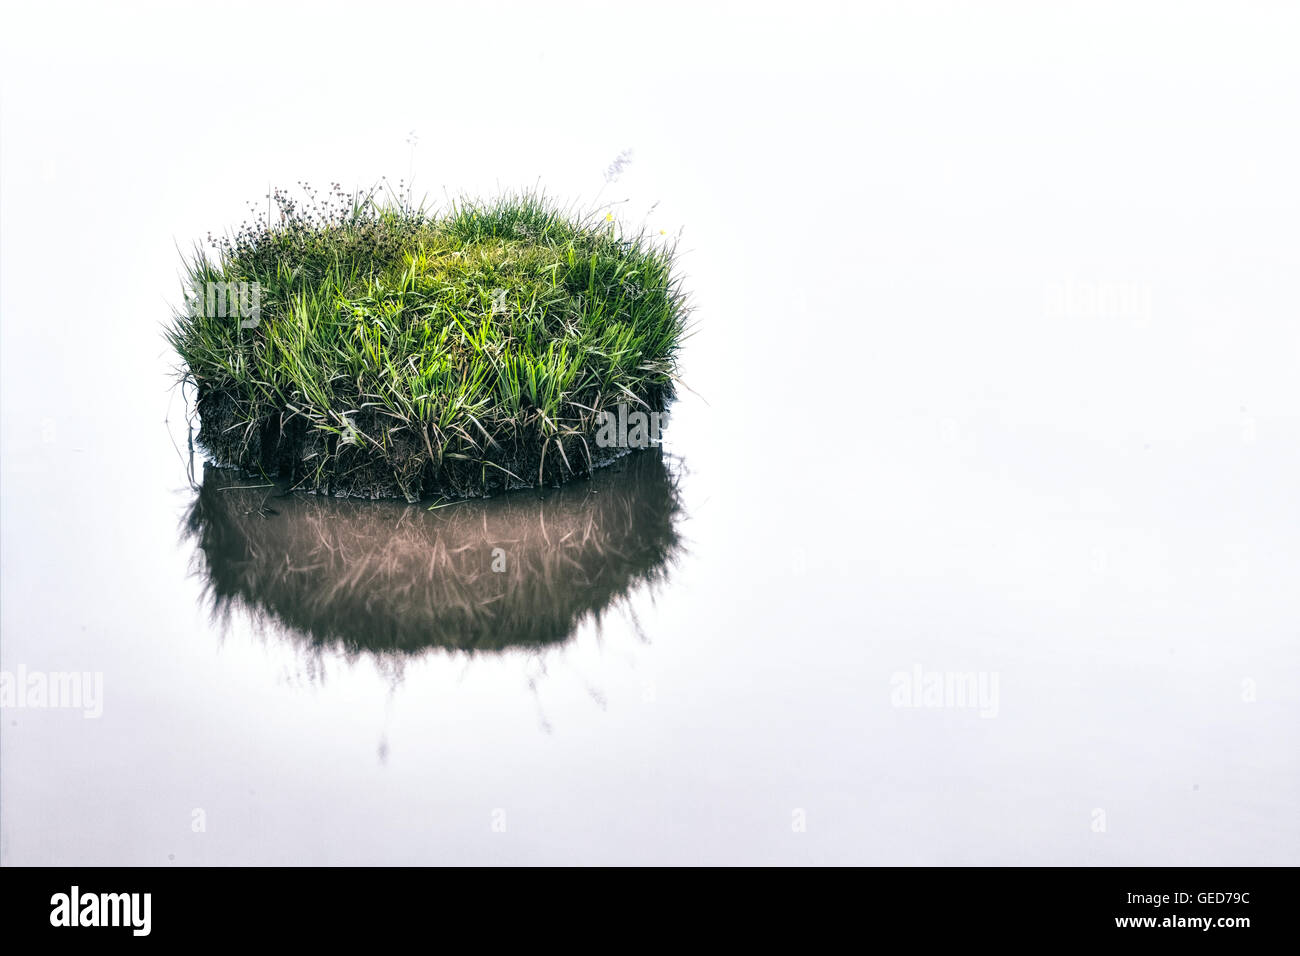 a little grass island in a pond Stock Photo